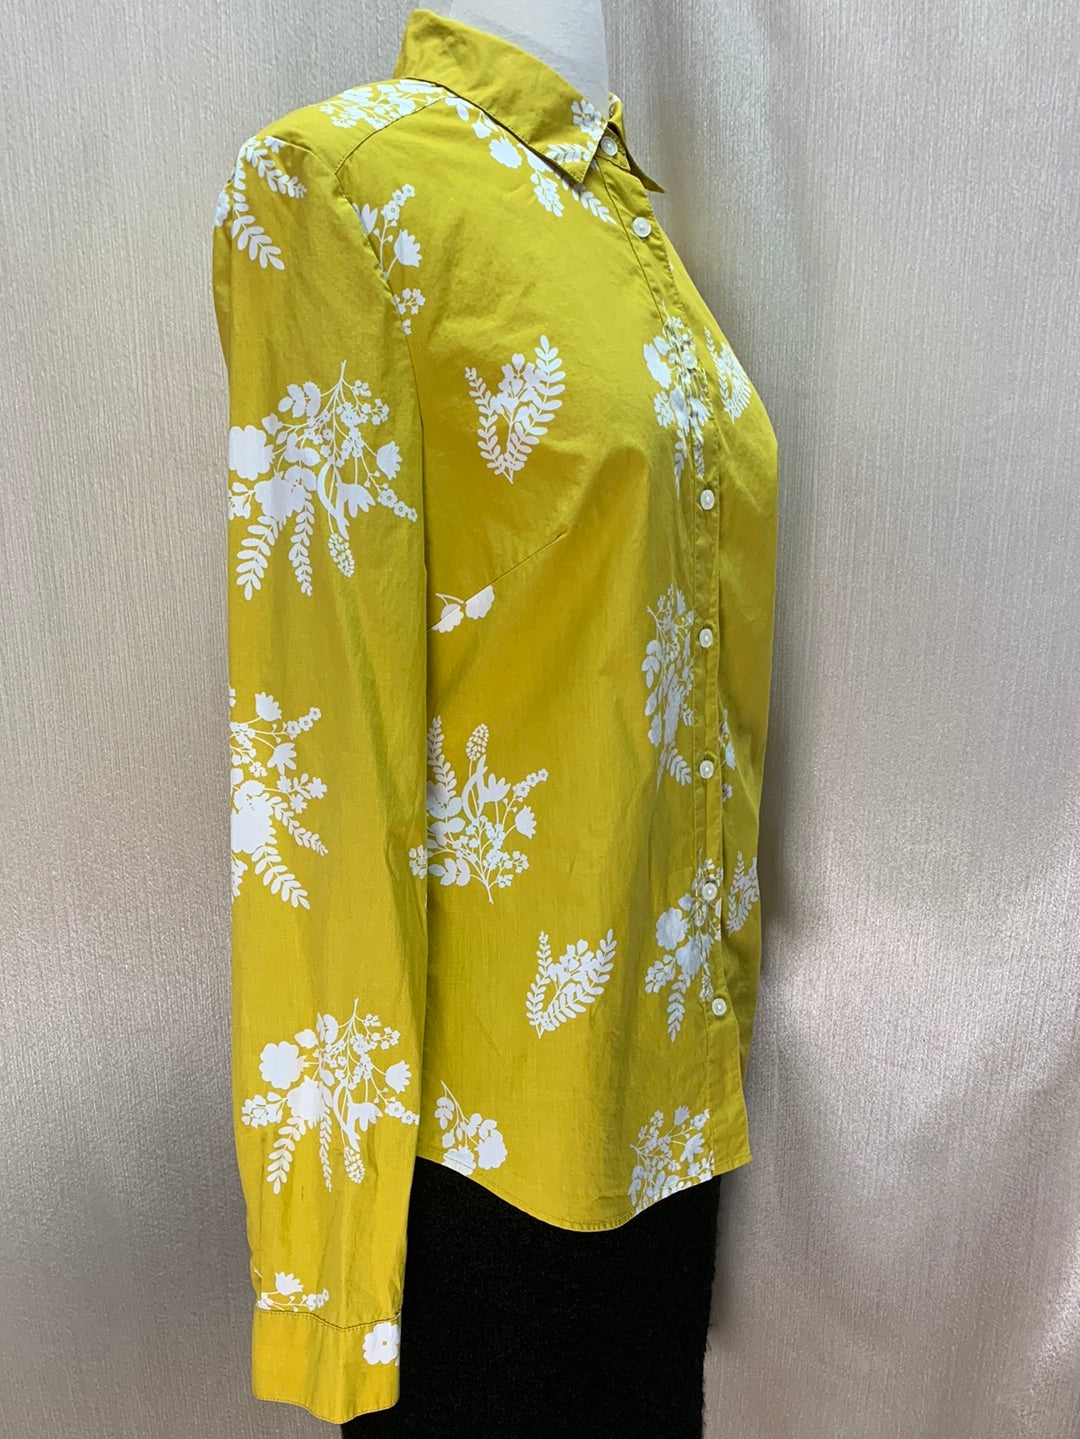 BODEN mustard yellow floral Button Up Long Sleeve Classic Shirt - US 8